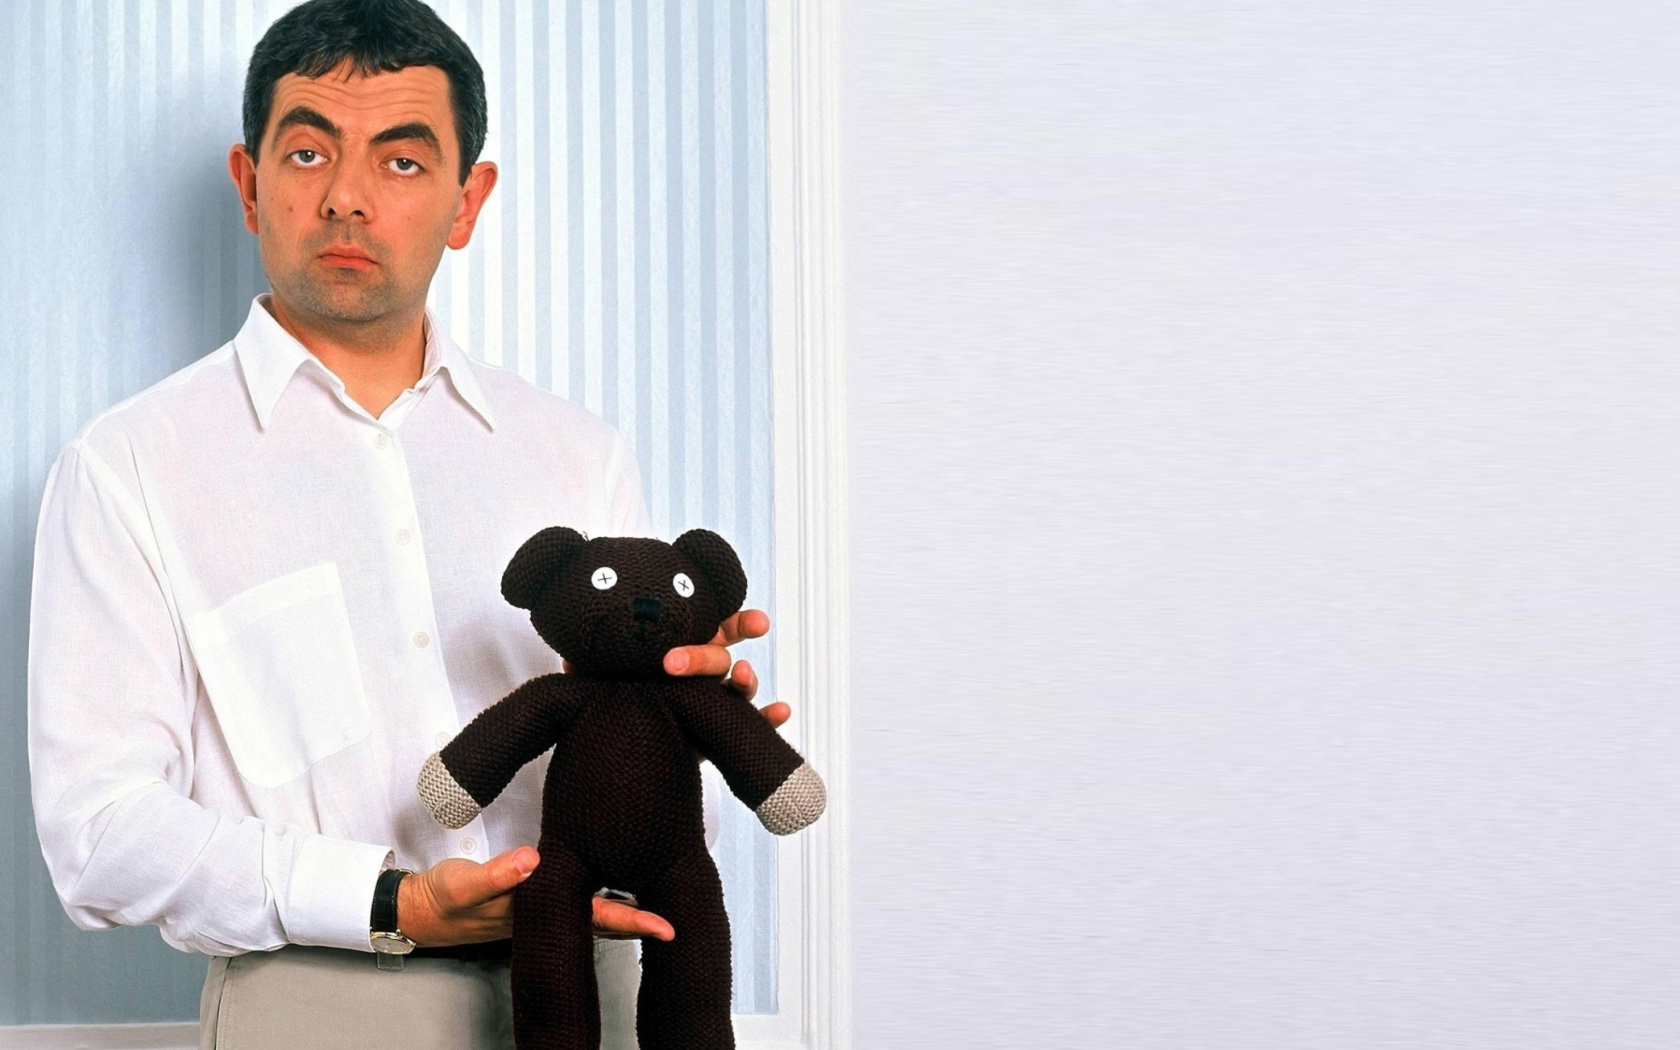 Mr Bean with Knitted Brown Teddy Bear wallpaper 1680x1050